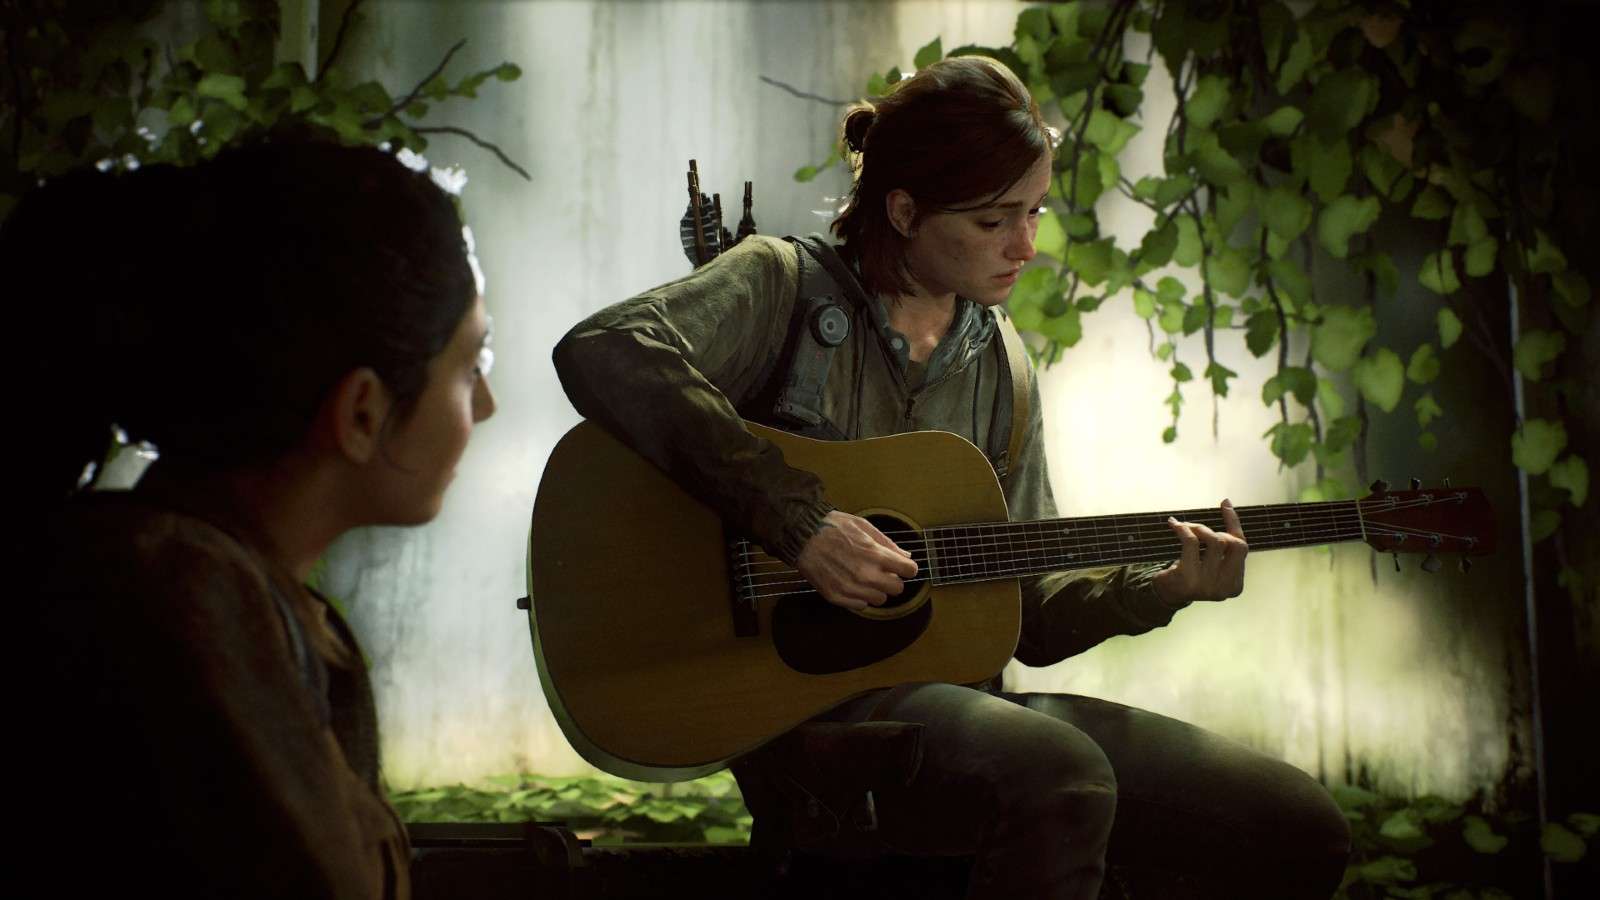 An image of Ellie and Dina in The Last of us Part II.